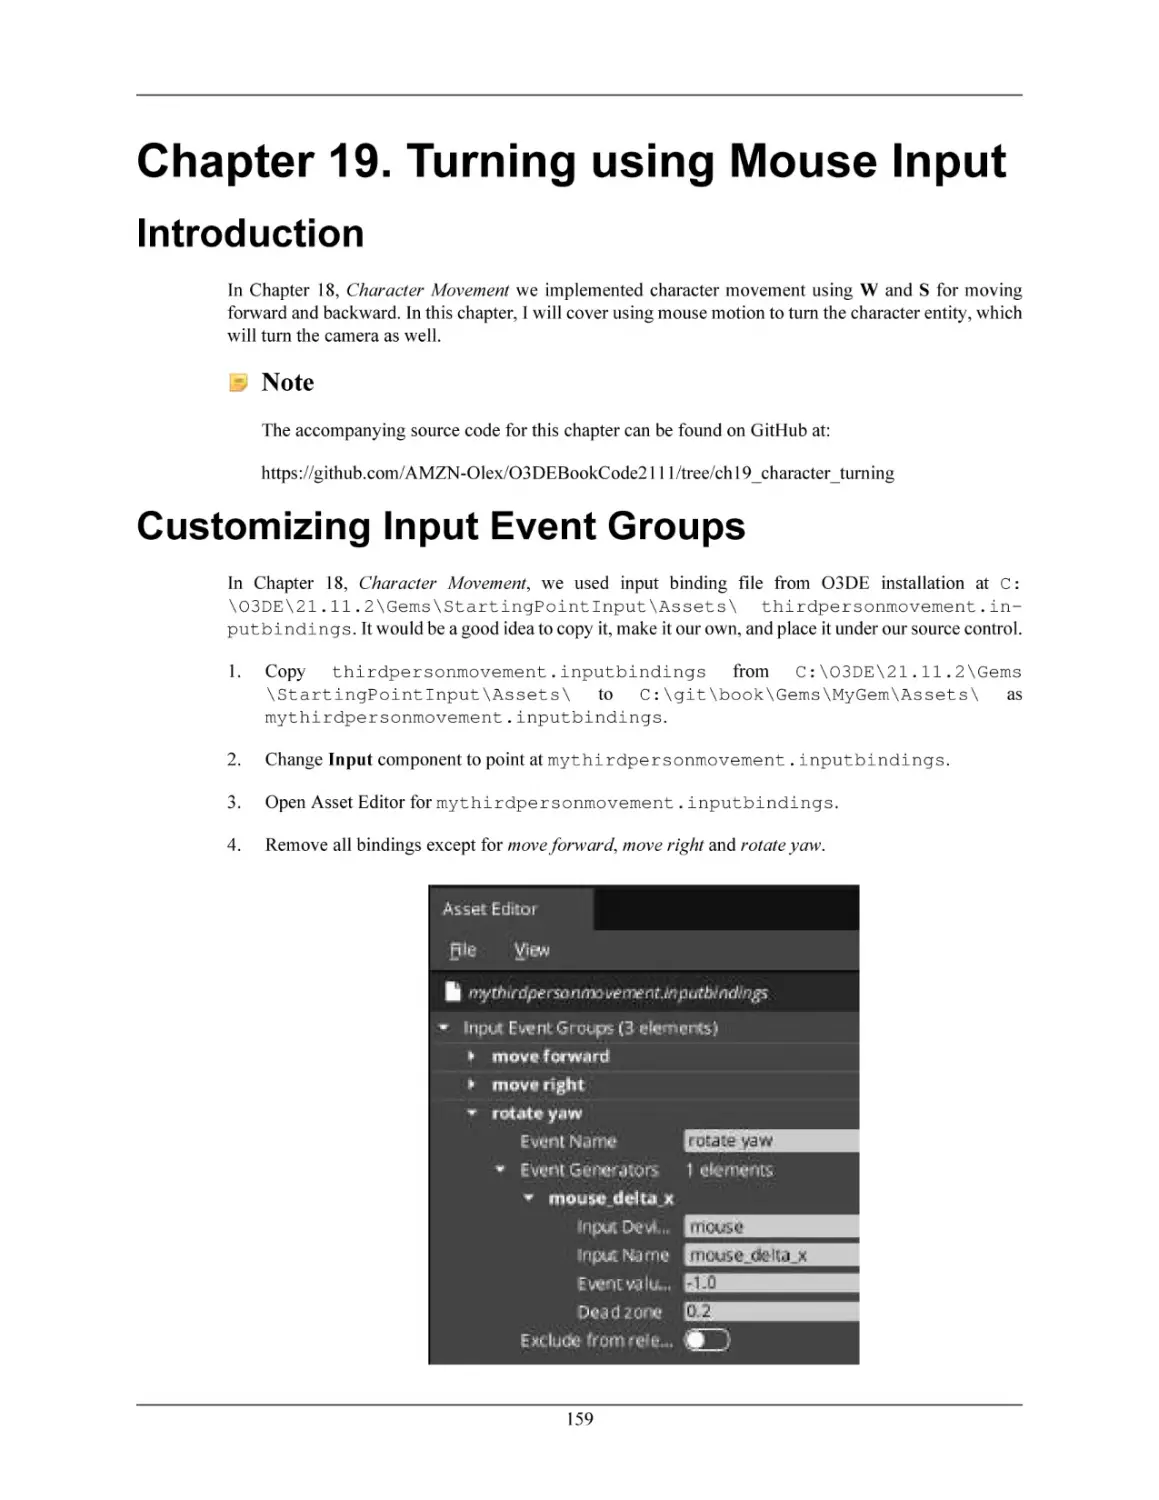 Chapter 19. Turning using Mouse Input
Introduction
Customizing Input Event Groups